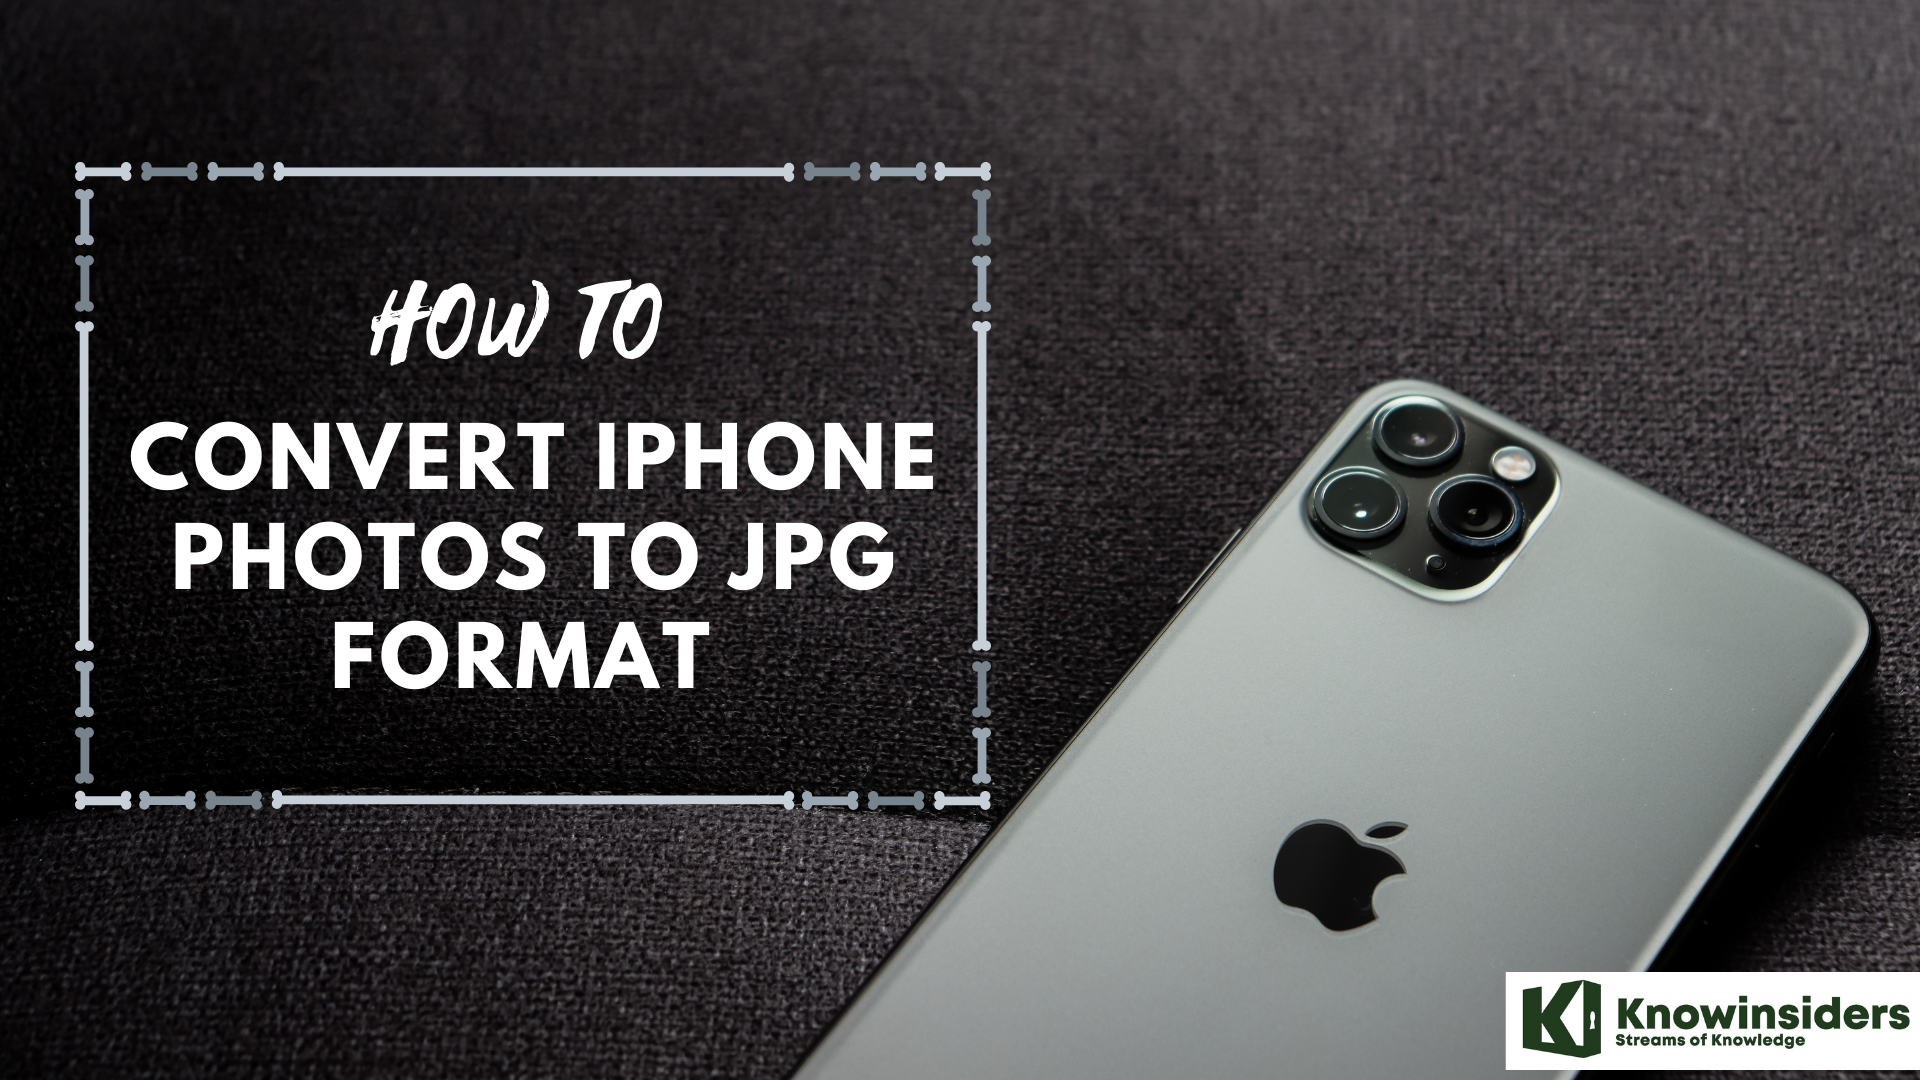 How To Convert iPhone Pictures to JPEG: Step-By-Step Guide